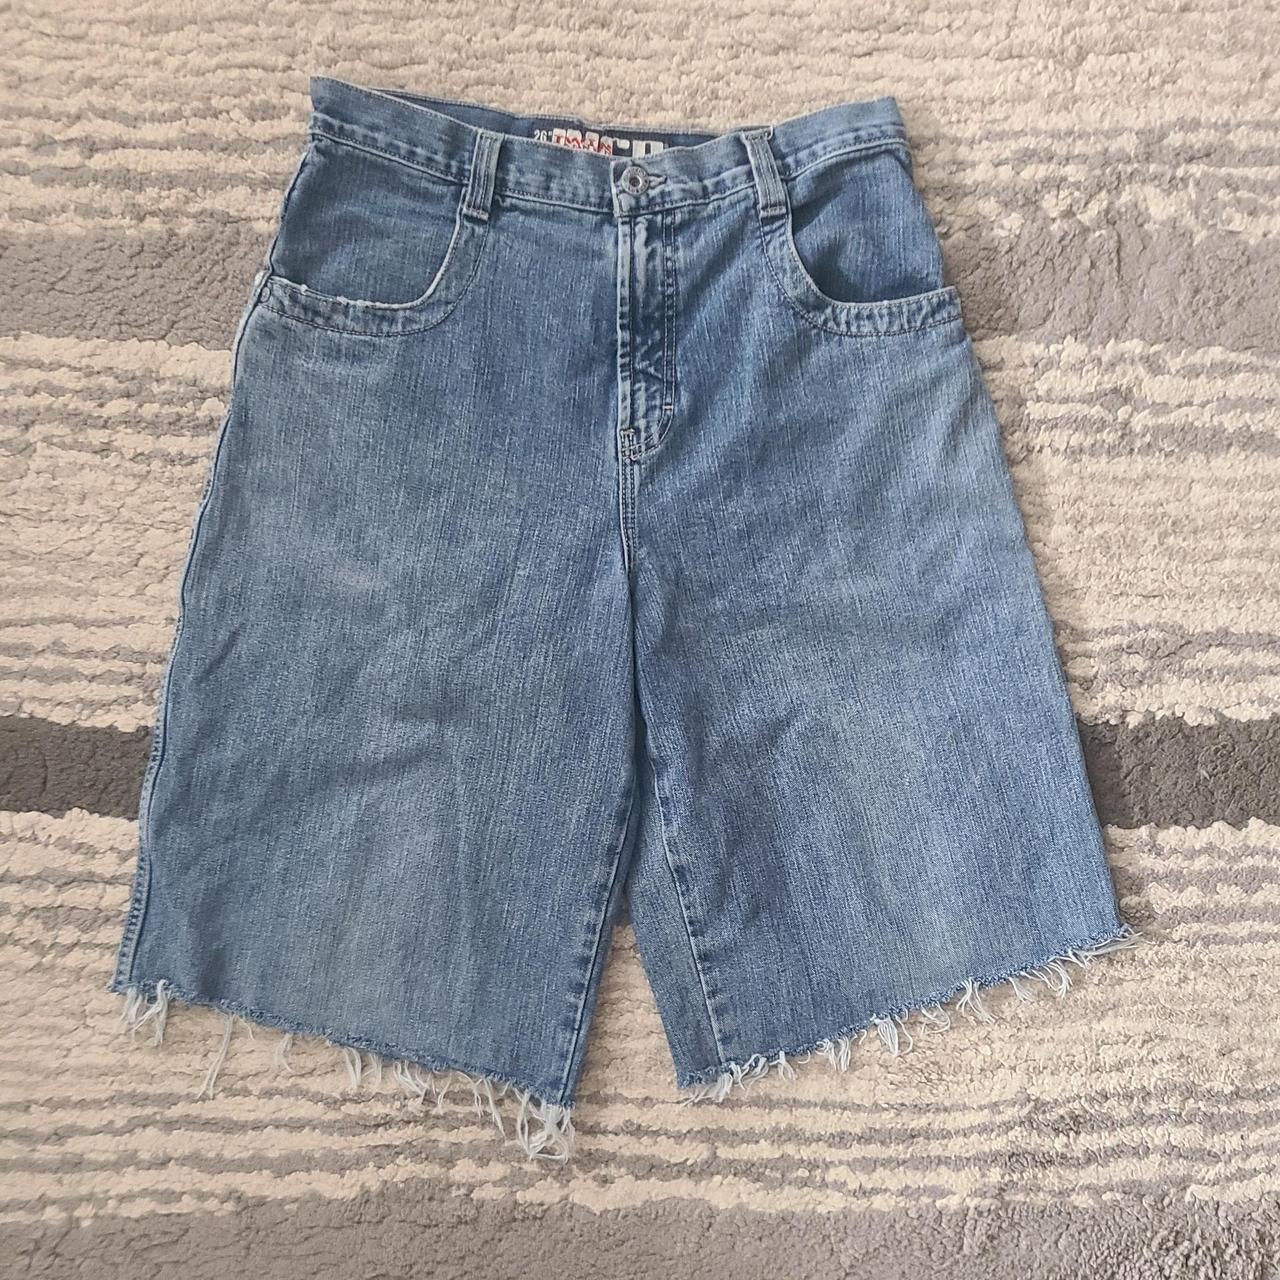 JNCO jorts, cropped twin cannons fit mad fat and go... - Depop